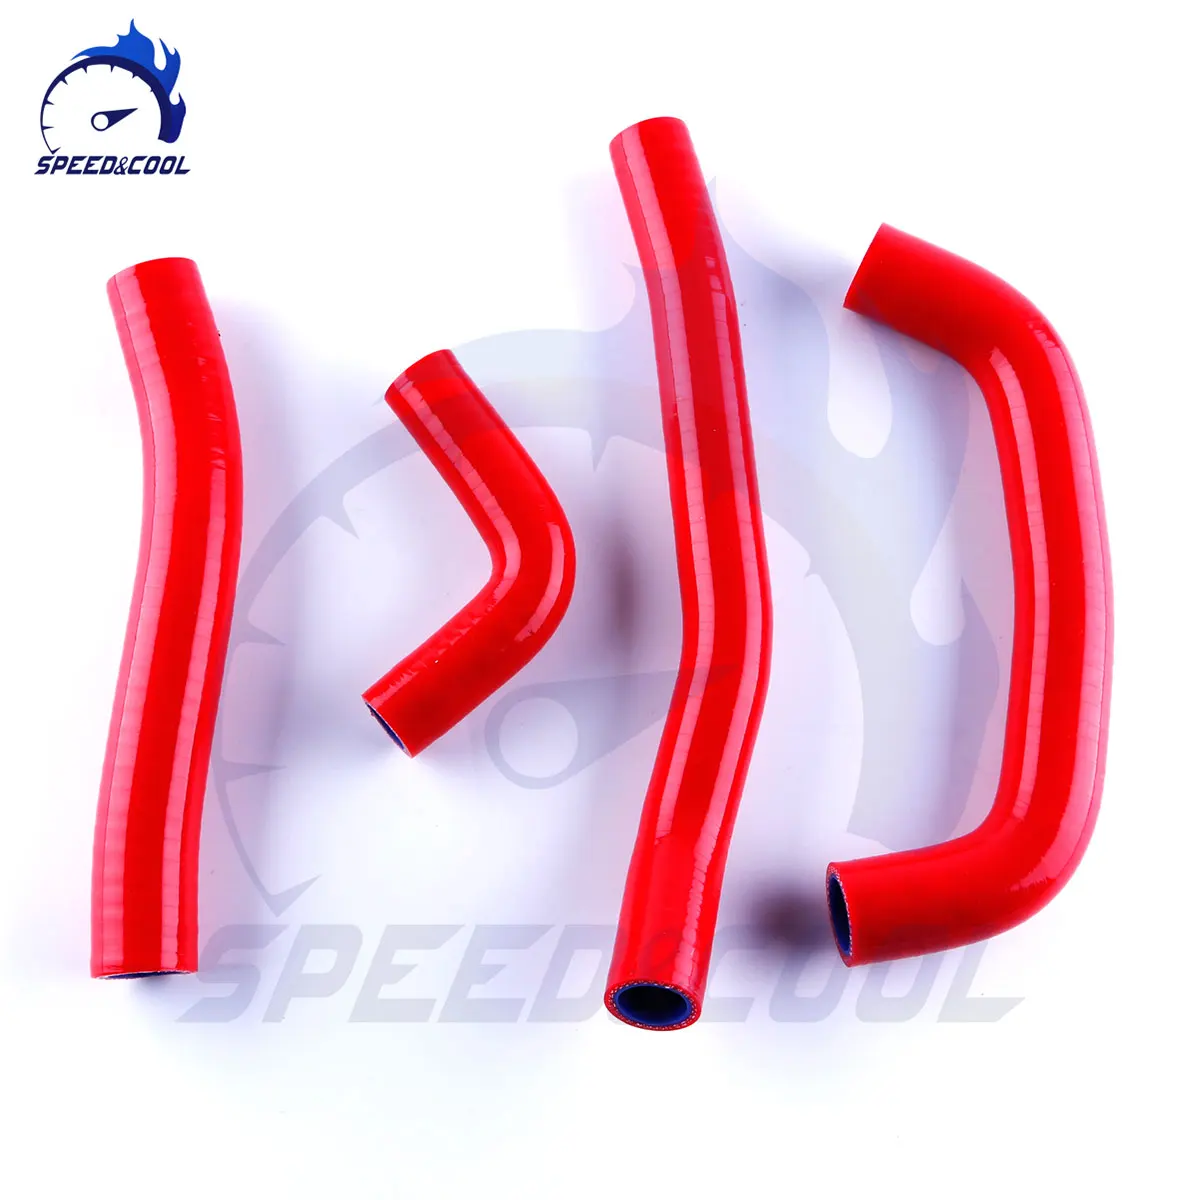 

For 2017-2020 Honda CRF450R CRF450RX CRF450 R CRF450 RX Motorcycle Silicone Radiator Coolant Tube Pipe Hose Kit